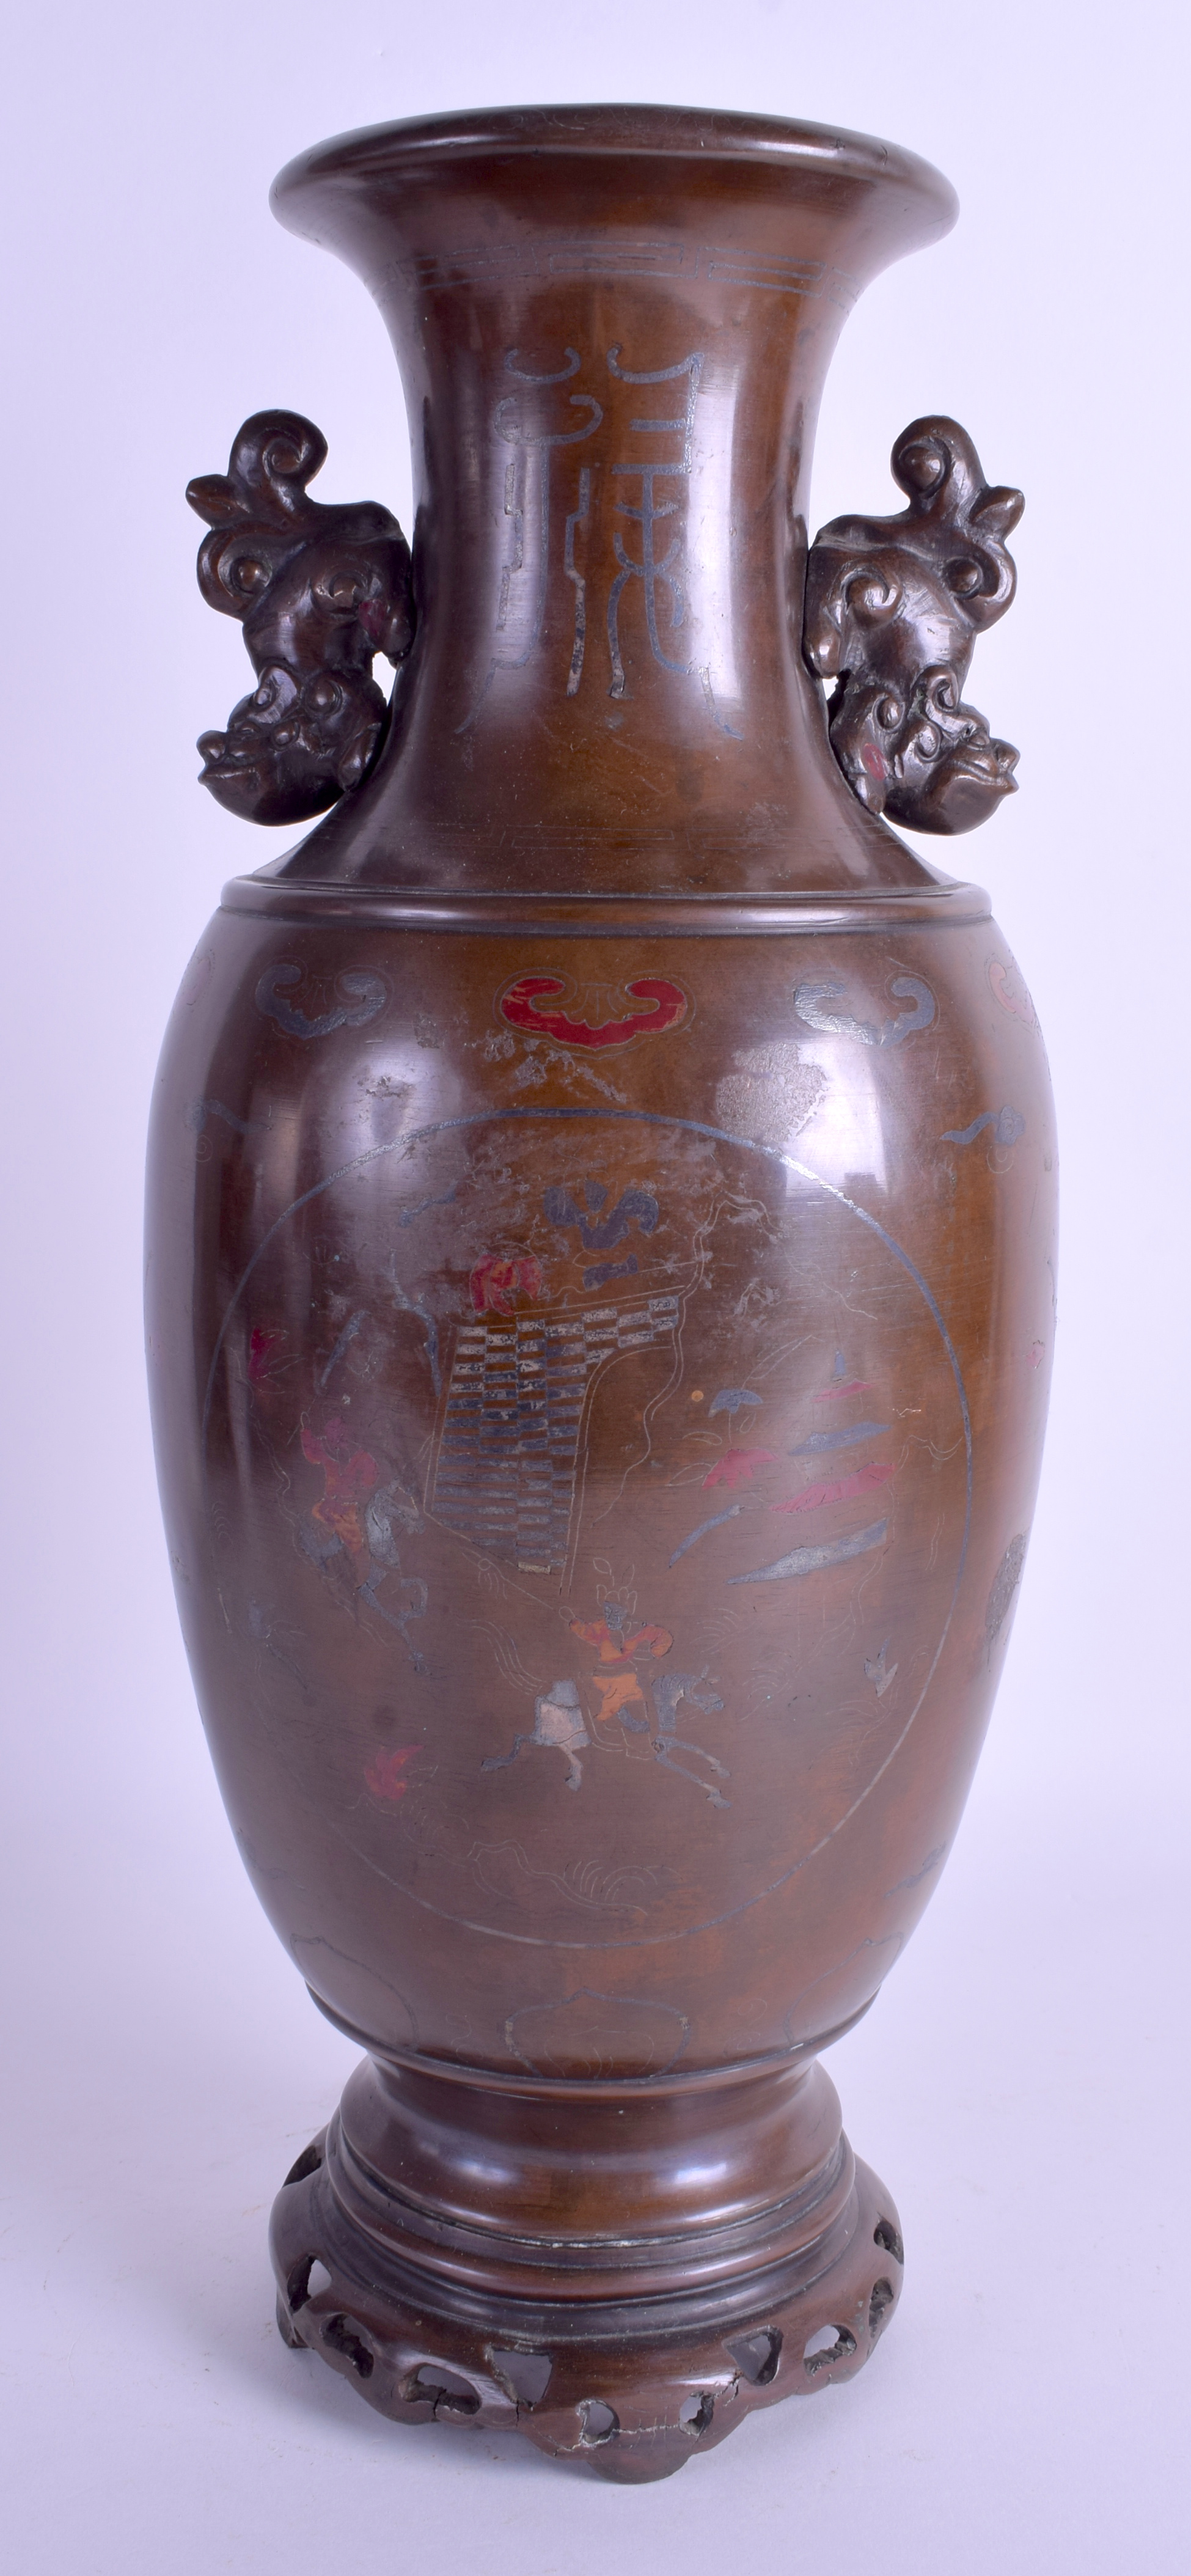 A LARGE 19TH CENTURY CHINESE SILVER INLAID BRONZE VASE decorated with figures and clouds. 39 cm hig